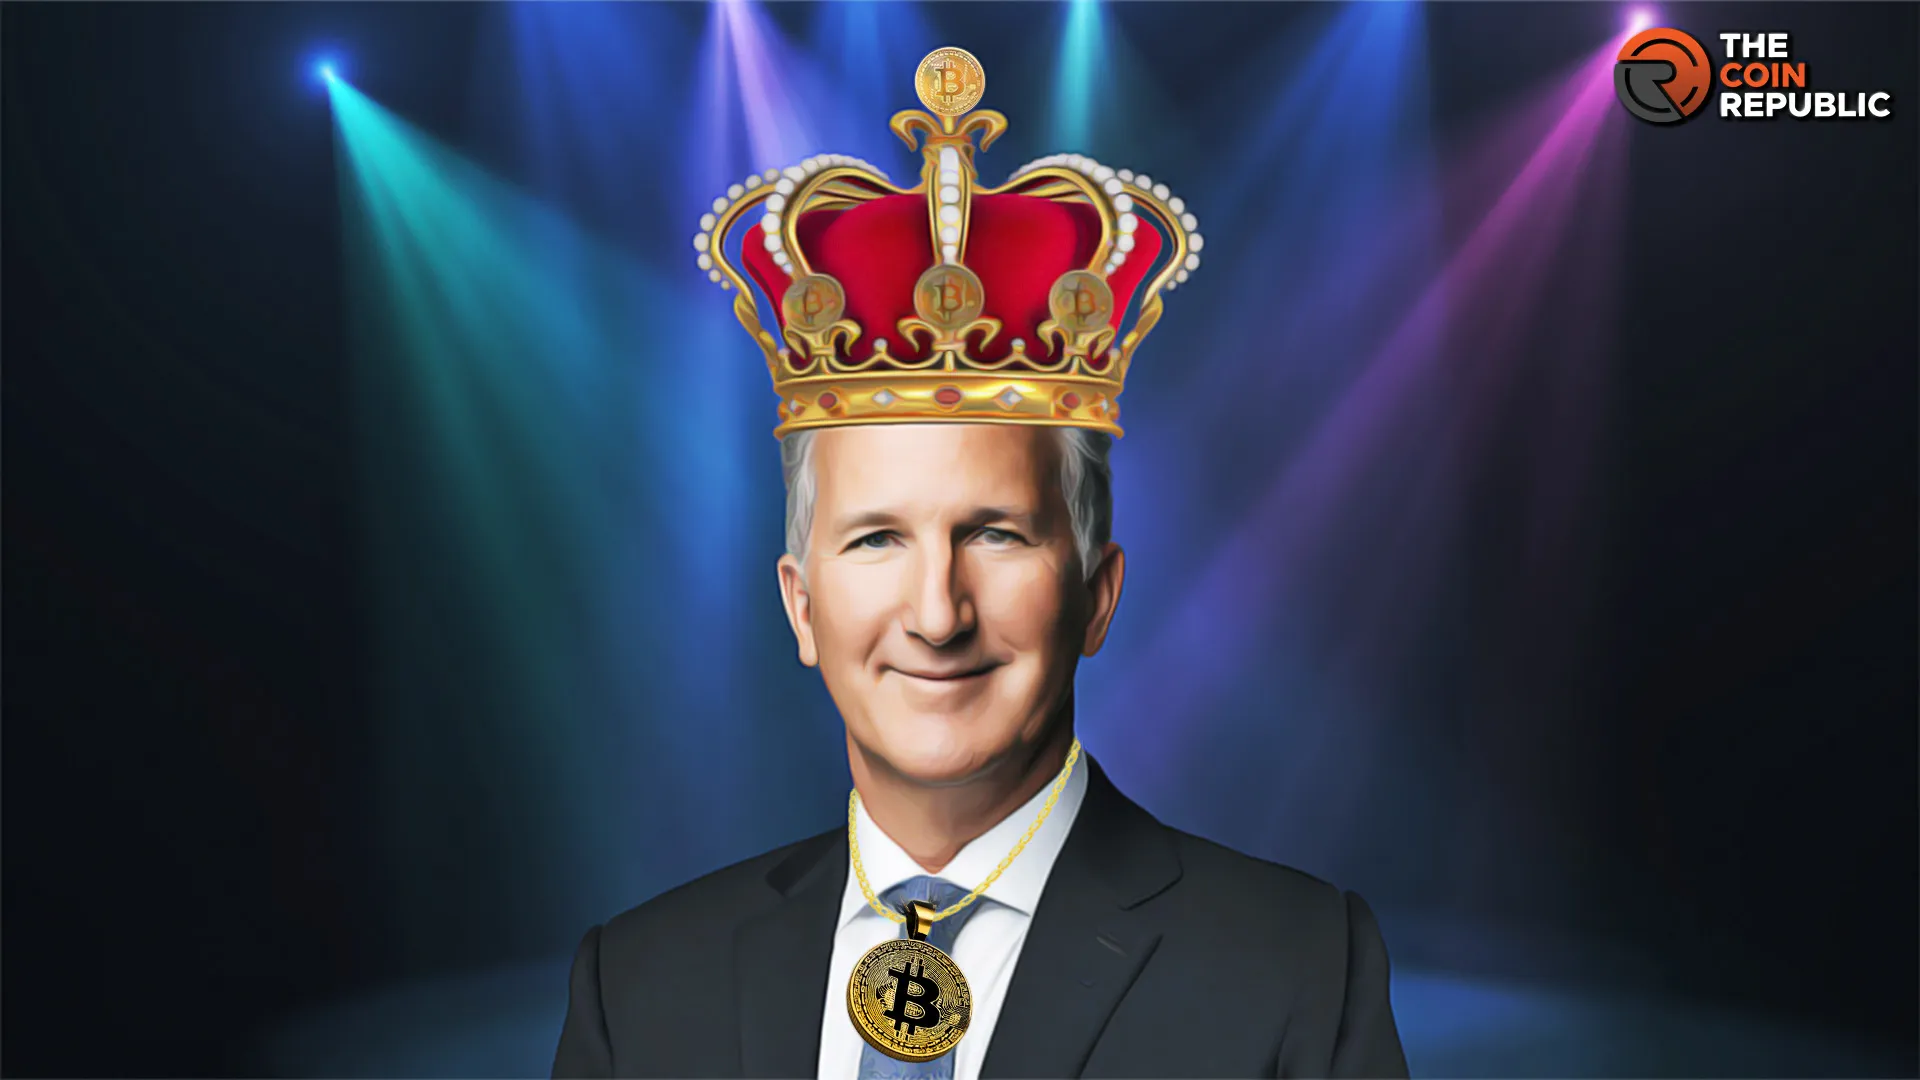 Peter Schiff Twitter Shows a Missed Opportunity on Bitcoin